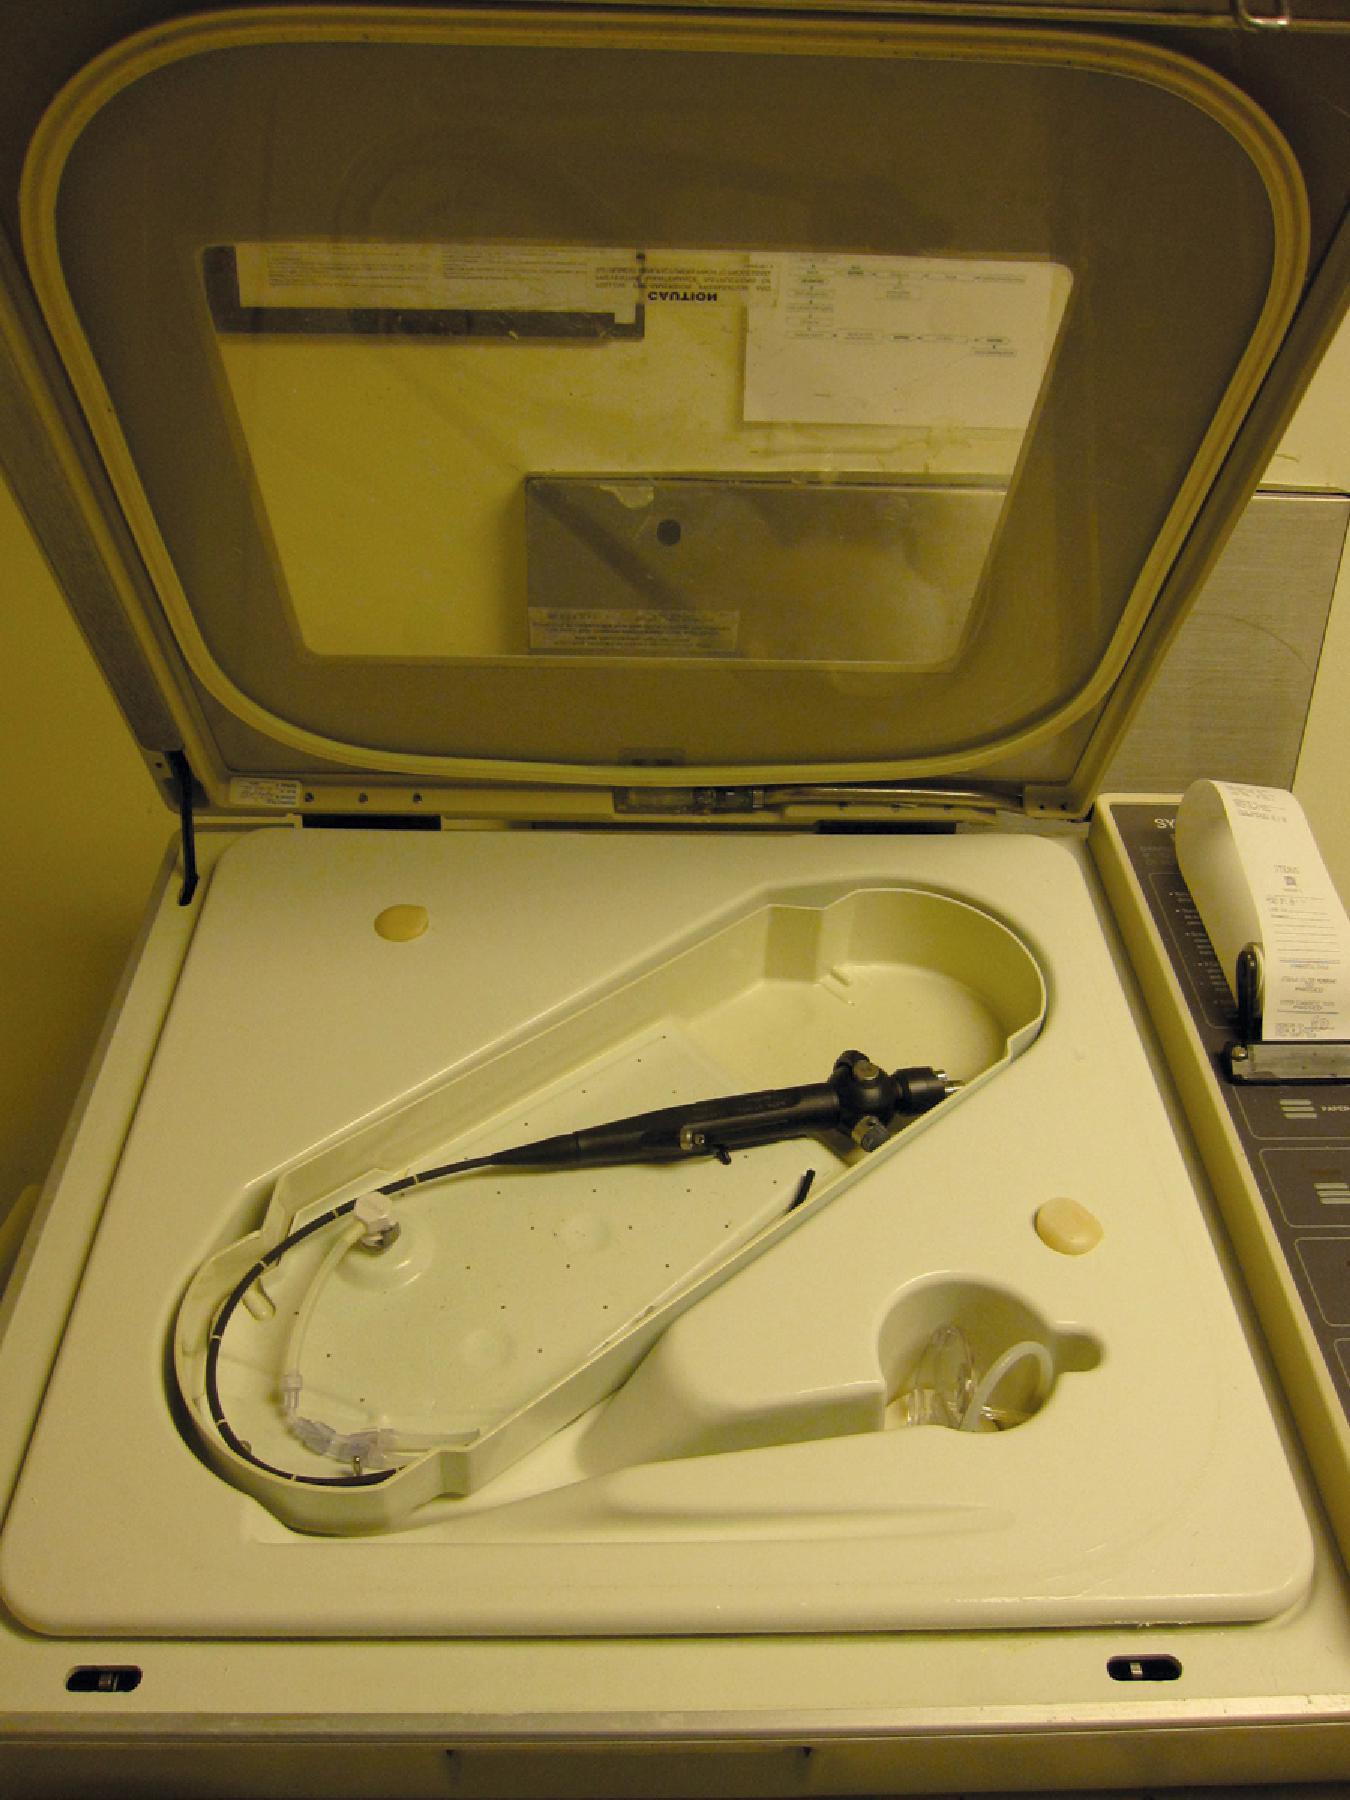 Fig. 24.5, Steris (Steris Corporation, Mentor, OH) machine for the sterilization of a flexible bronchoscope. The working channel is flushed out before being carefully placed within the sterilizer.